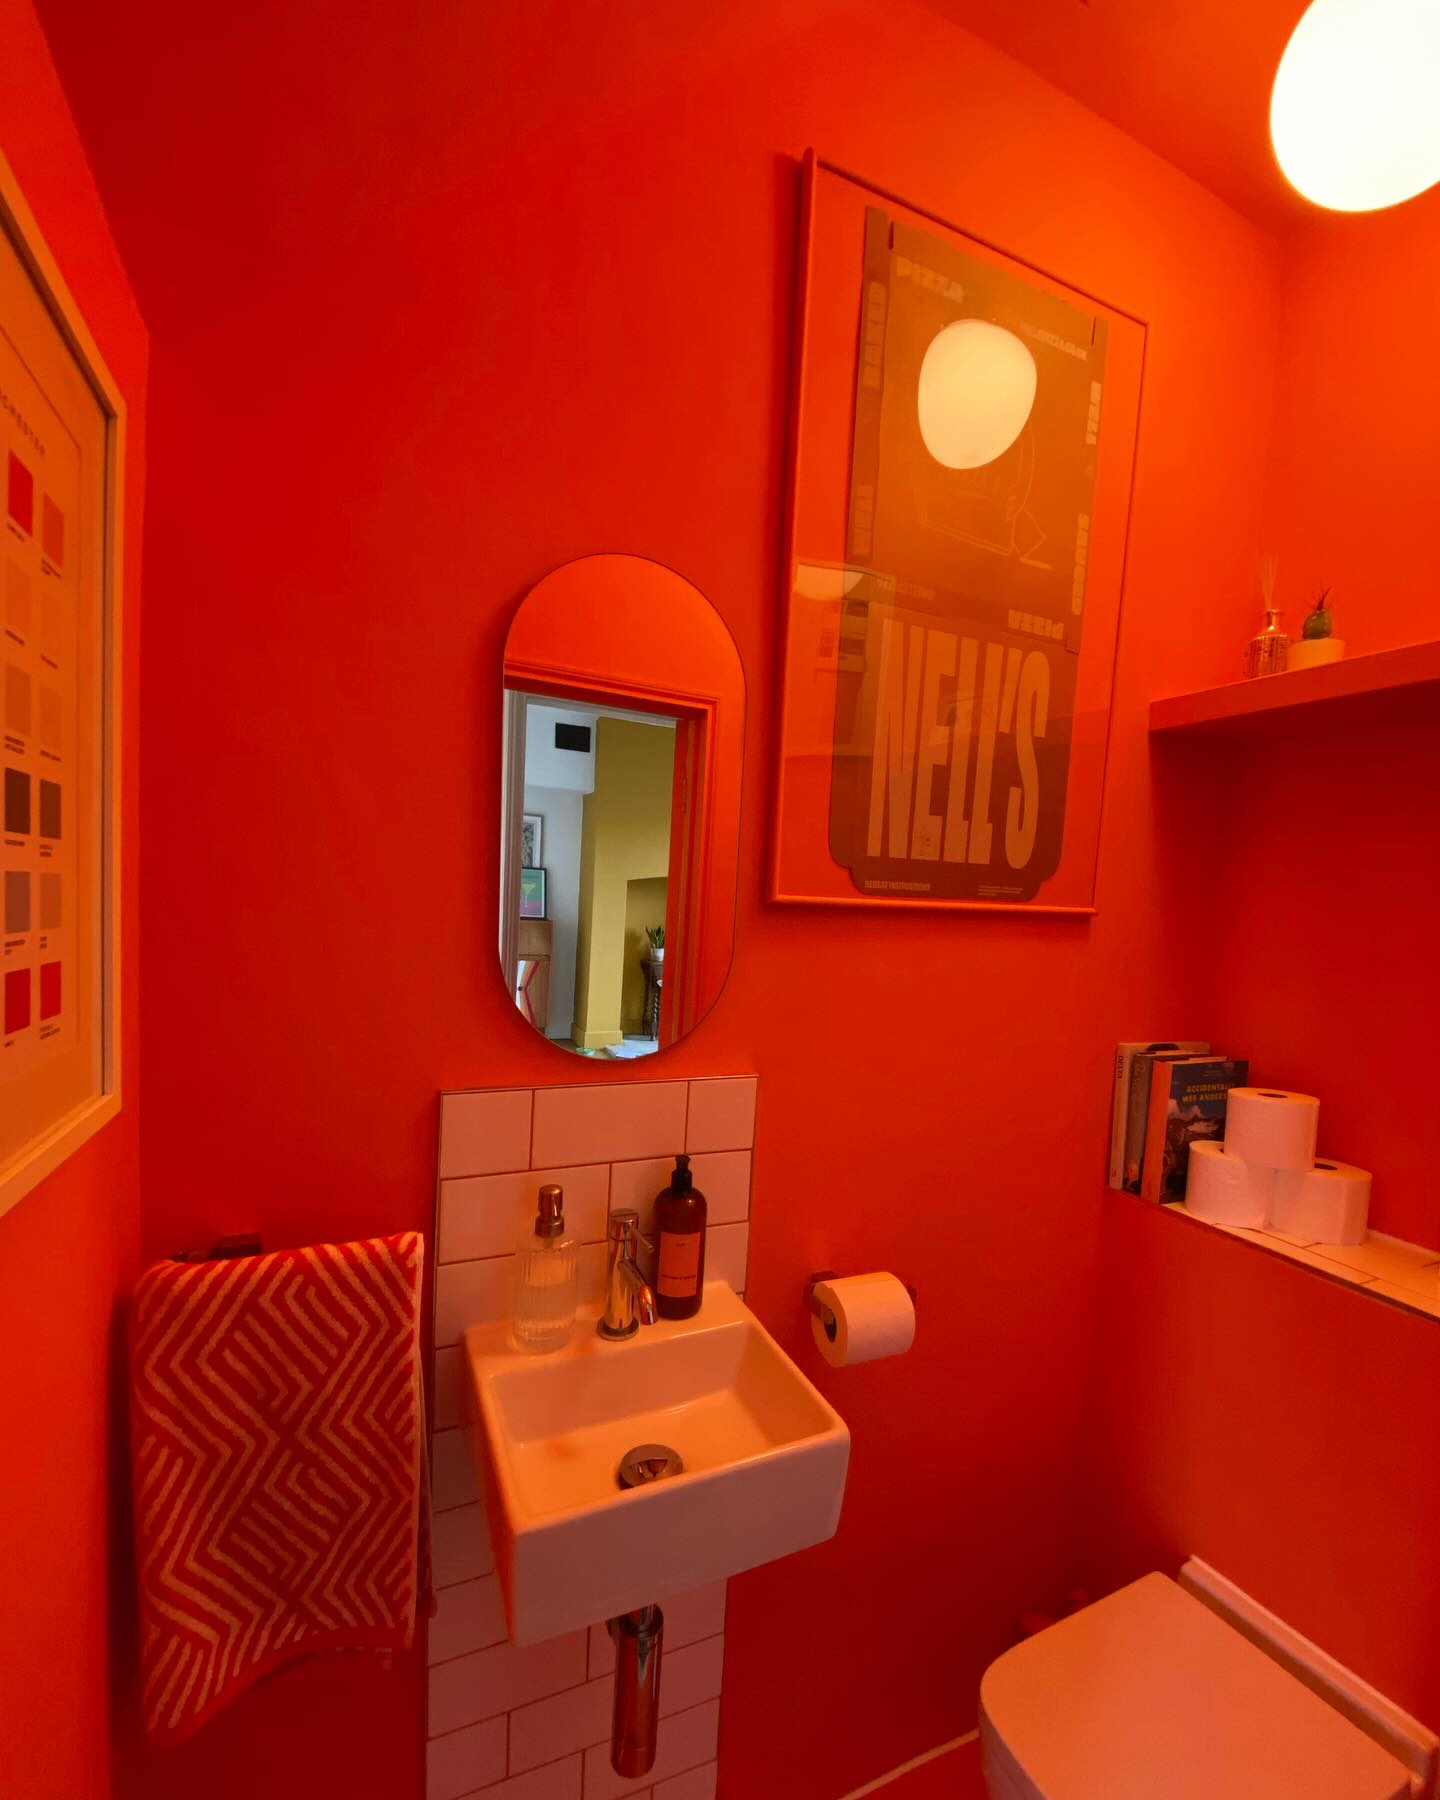 A man has recreated the loos at Nell's in his own home. Credit: Instagram, @hattathome